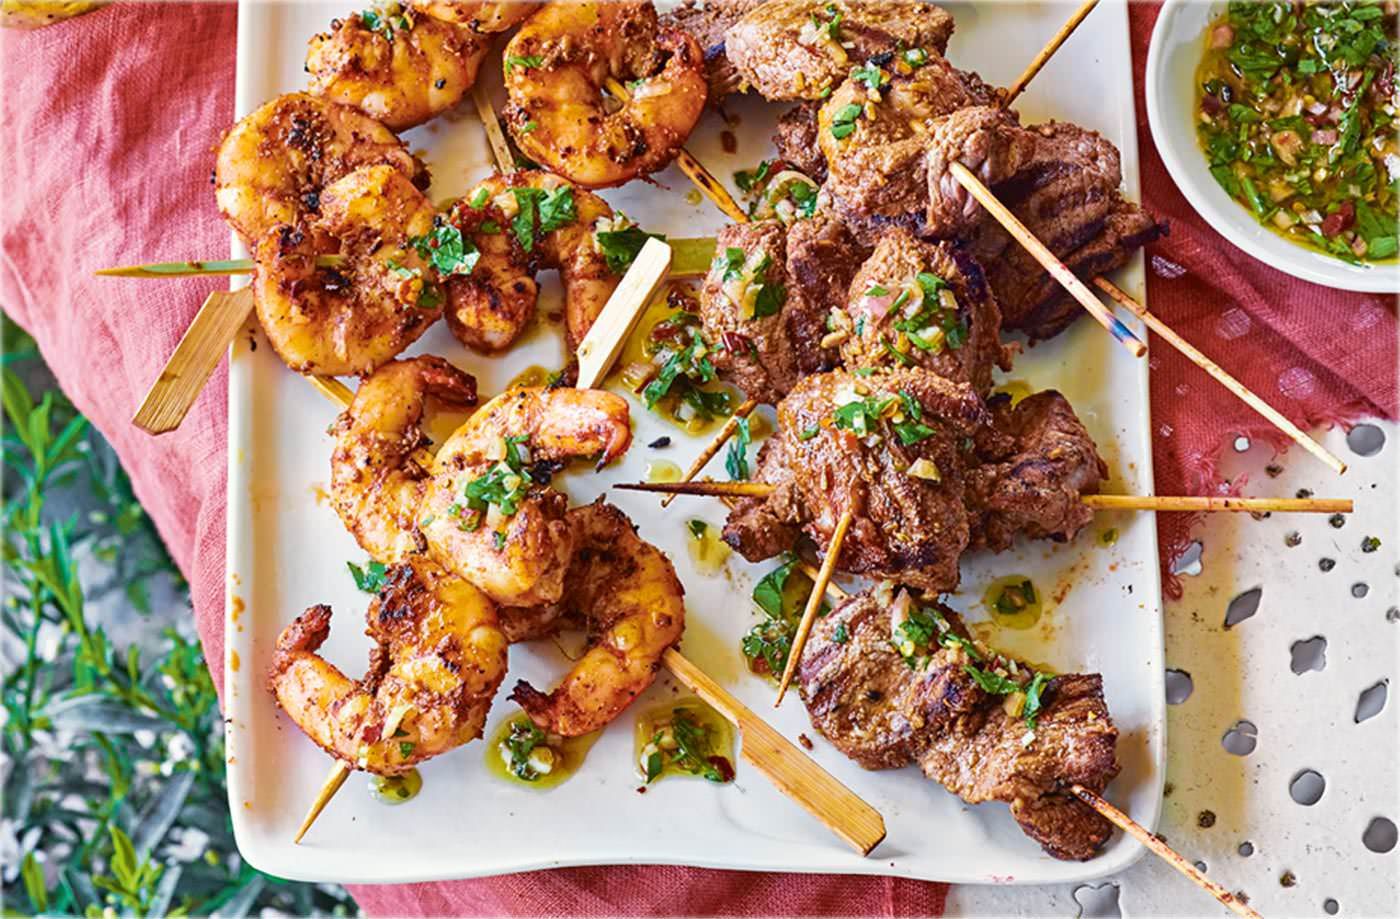 10 best BBQ recipes: ideas for meat eaters, vegetarians and more ...